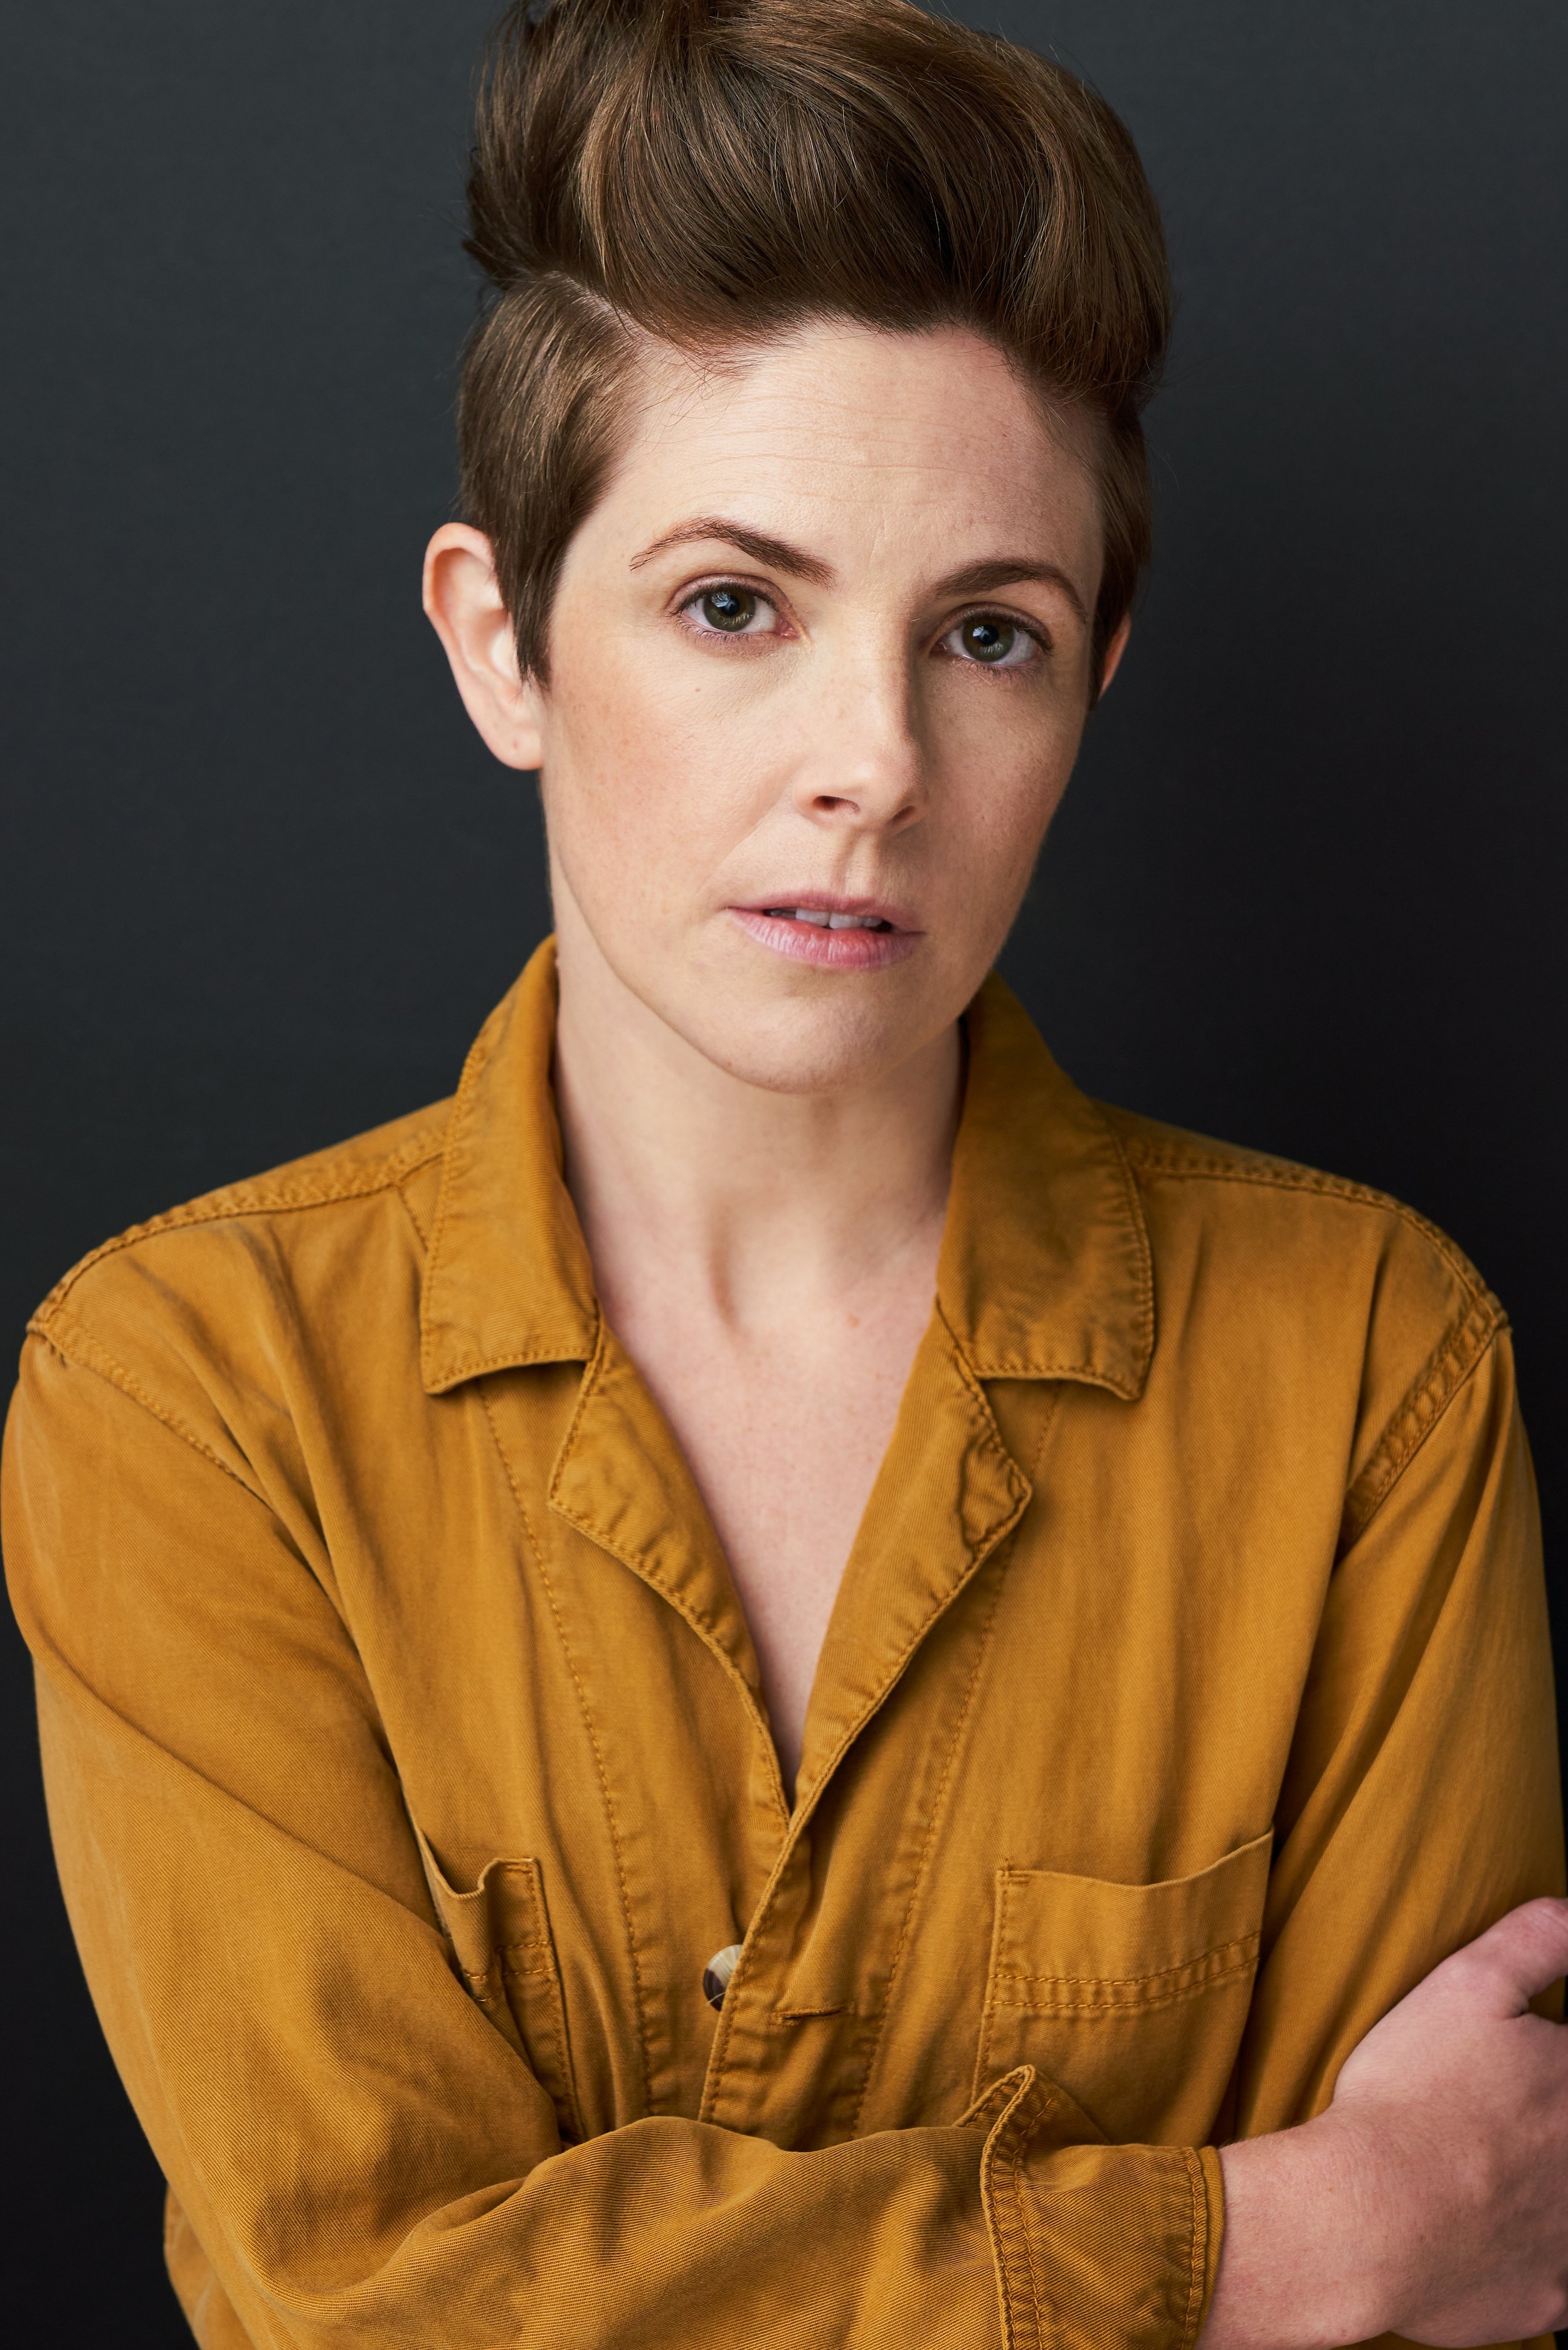 General Theatrical Headshot of Actor, Kate Fahrner | HMUA - Anne-Marie Kennedy